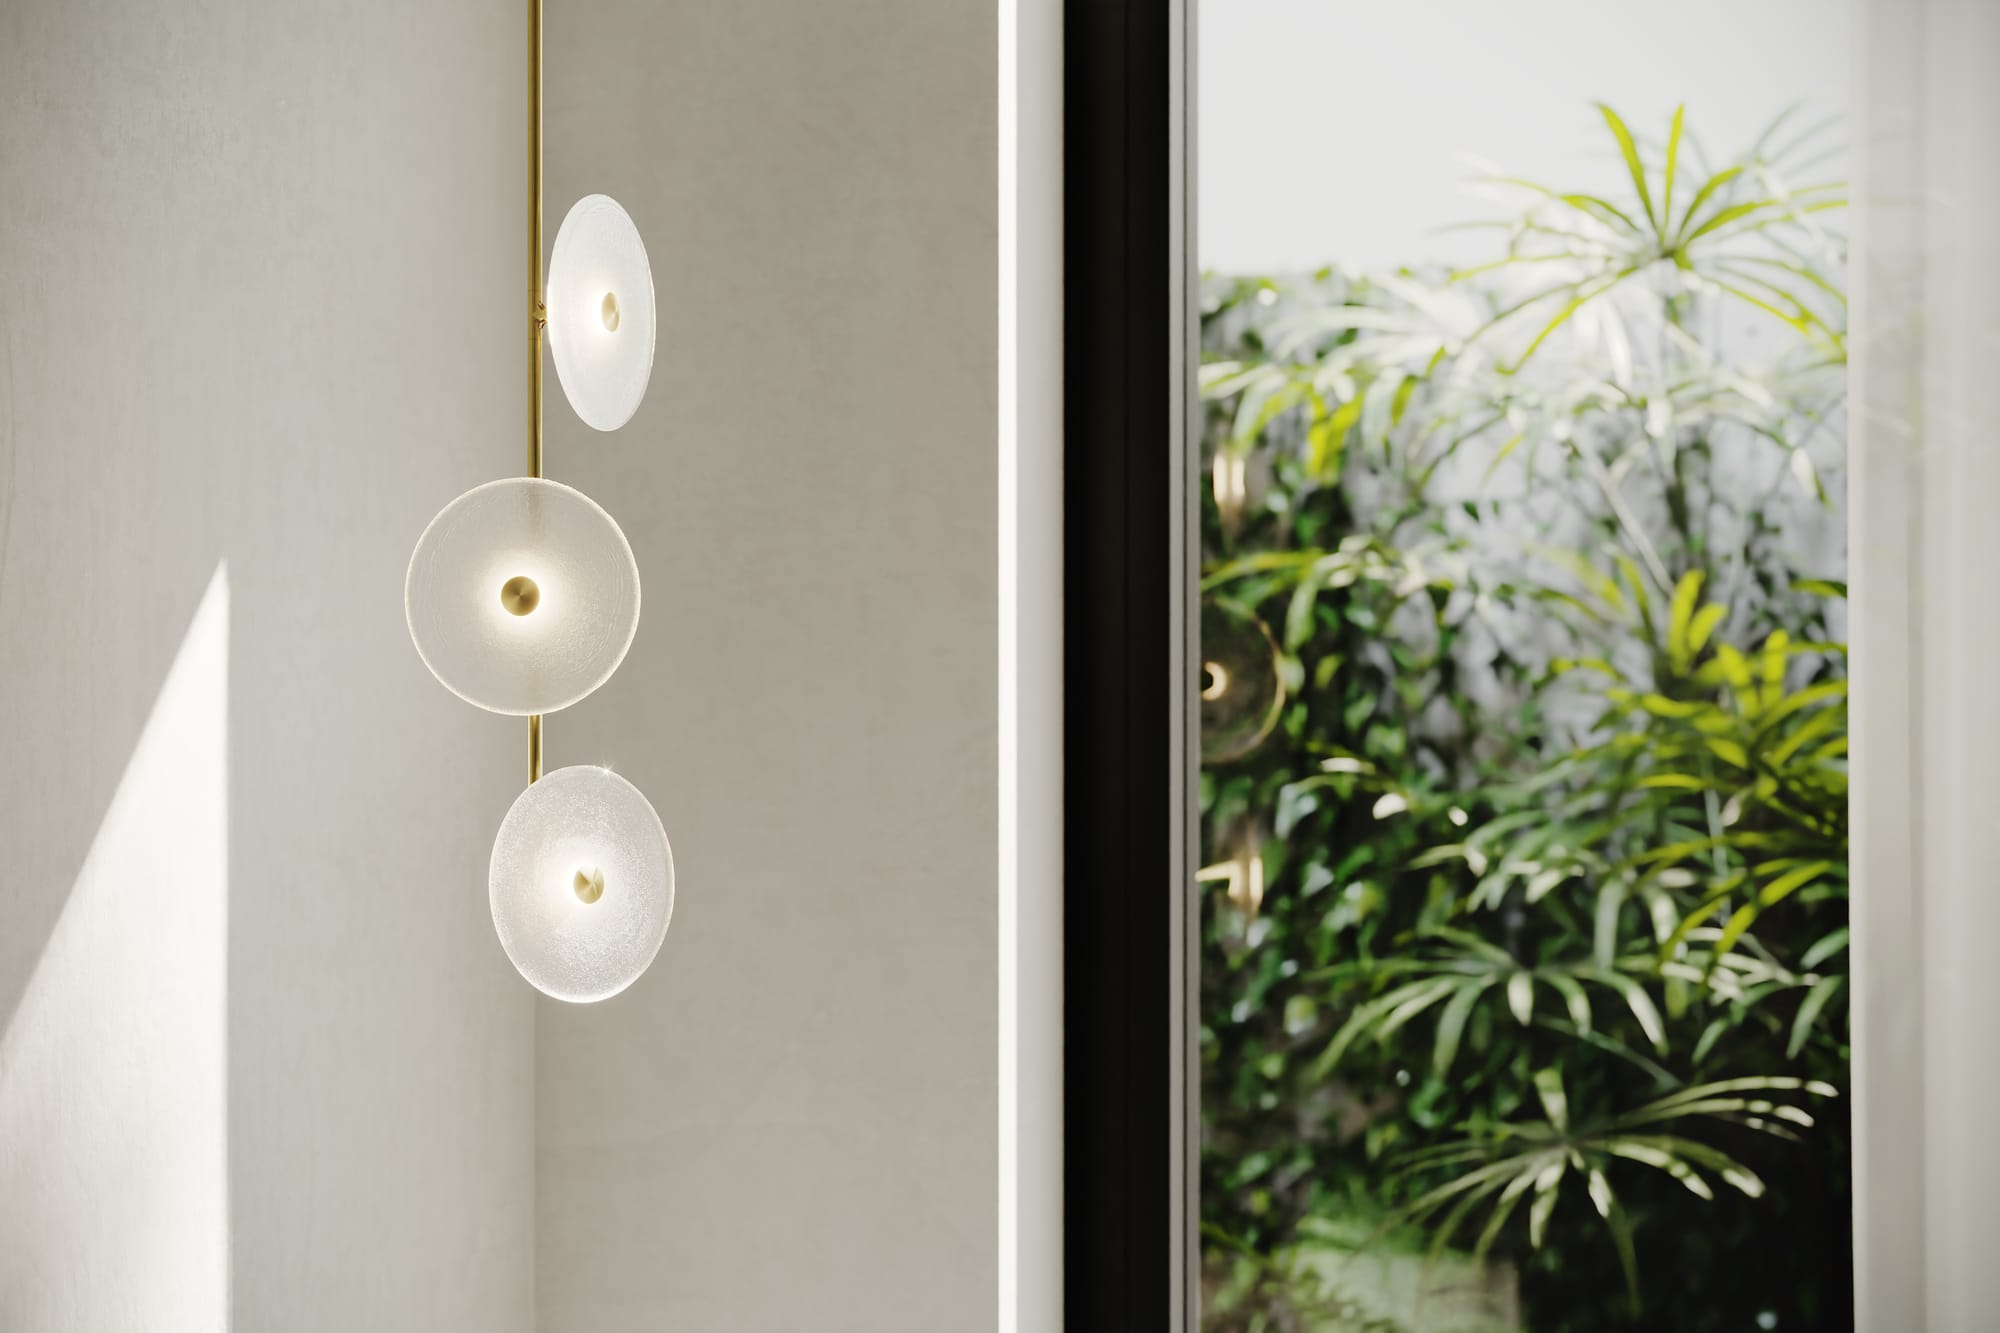 Coral Trio Off Centered Pendant Light by SOKTAS. Copyright of SOKTAS. Abstract pendant light hanging in corner, made of three glass dishes attached to gold pole, facing in different directions. 